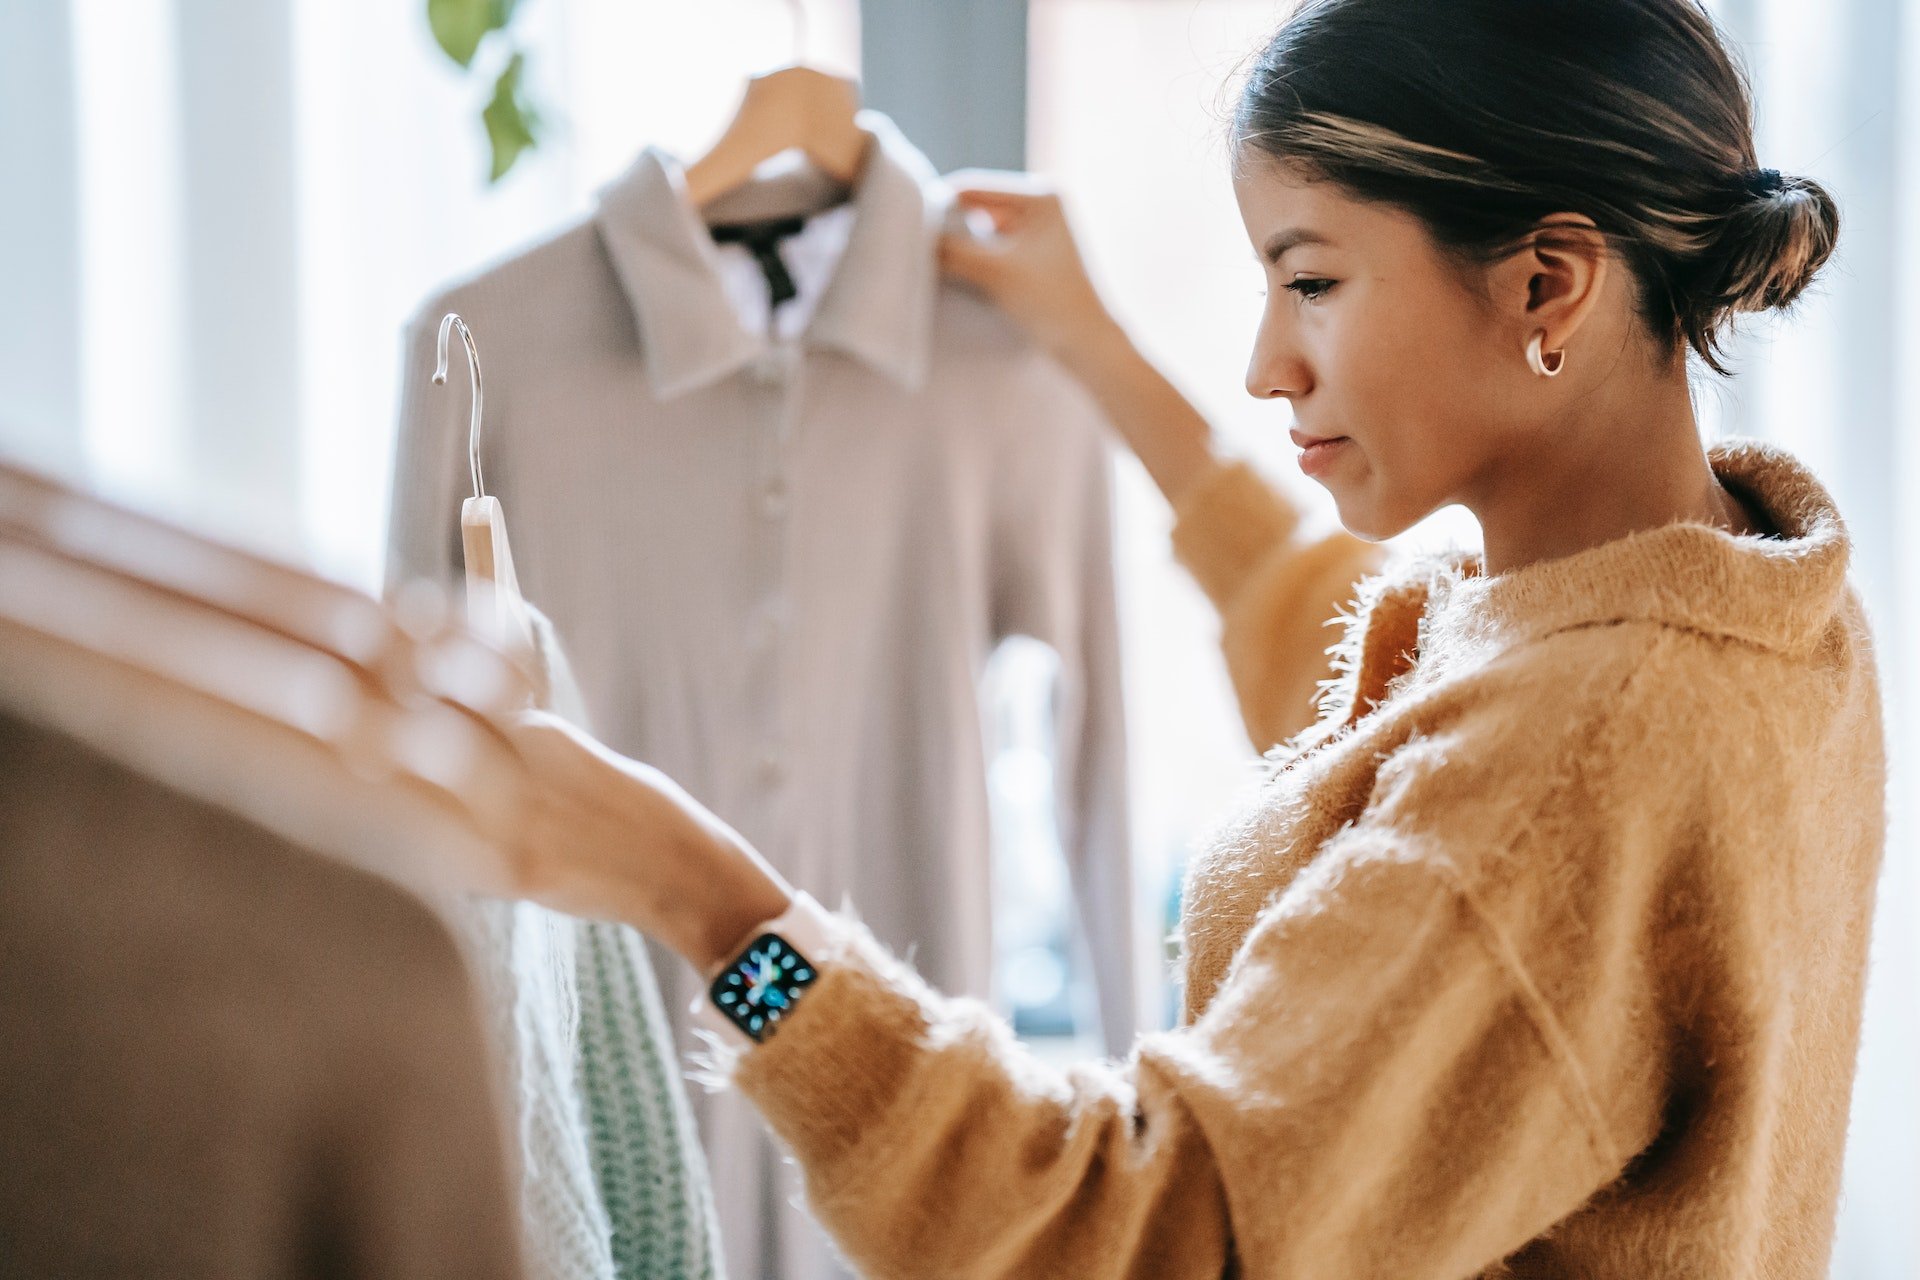 Inside the Retail Media opportunity for SMBs